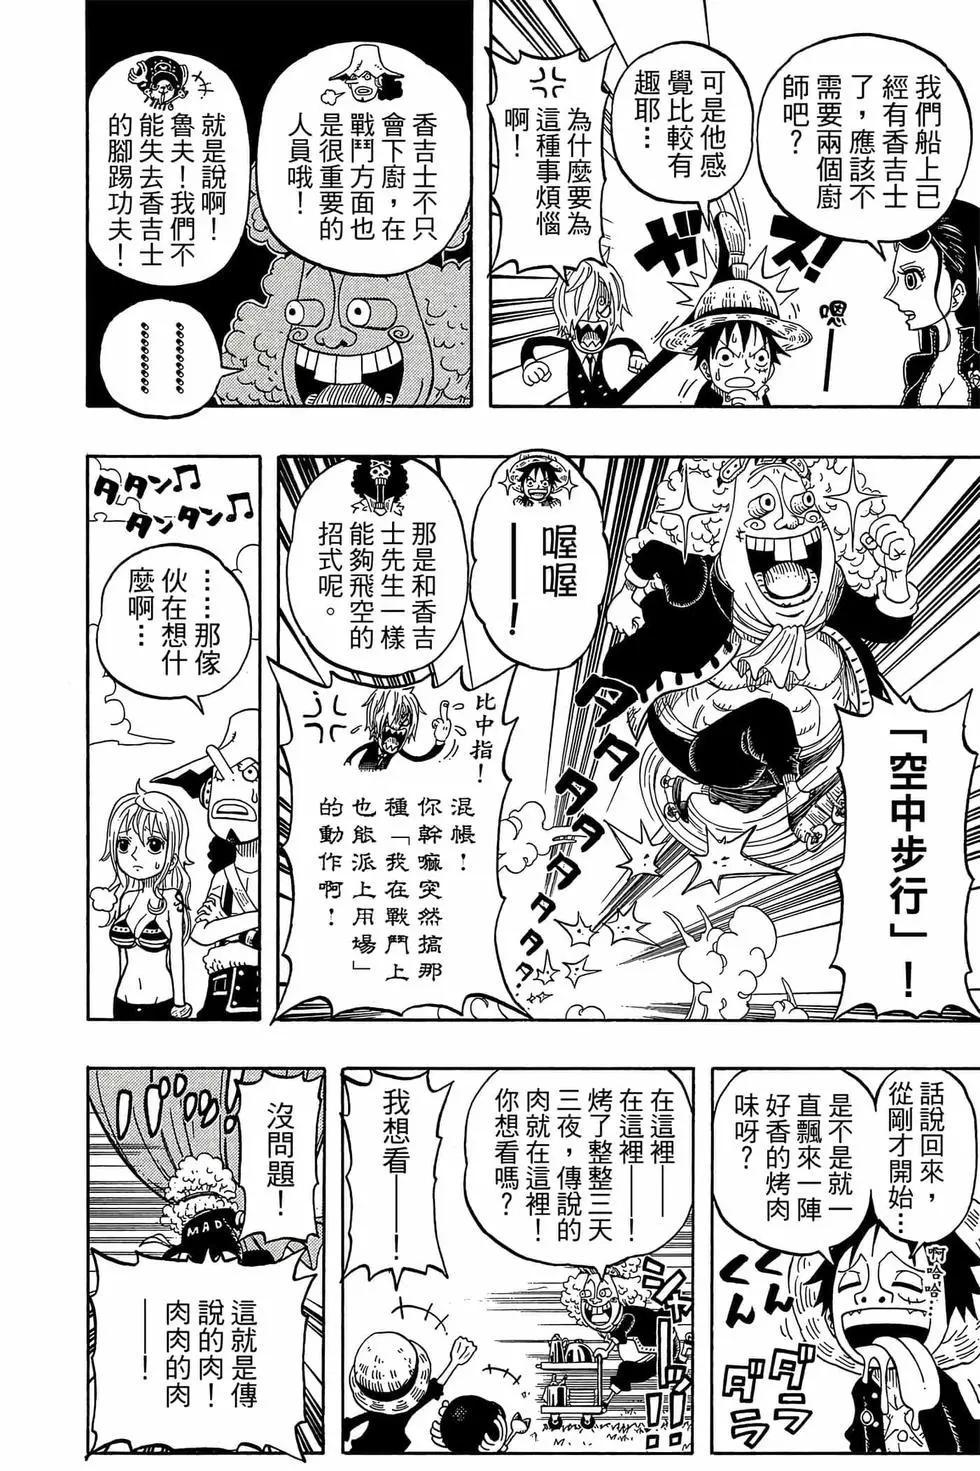 One piece party - 第01卷(1/4) - 5